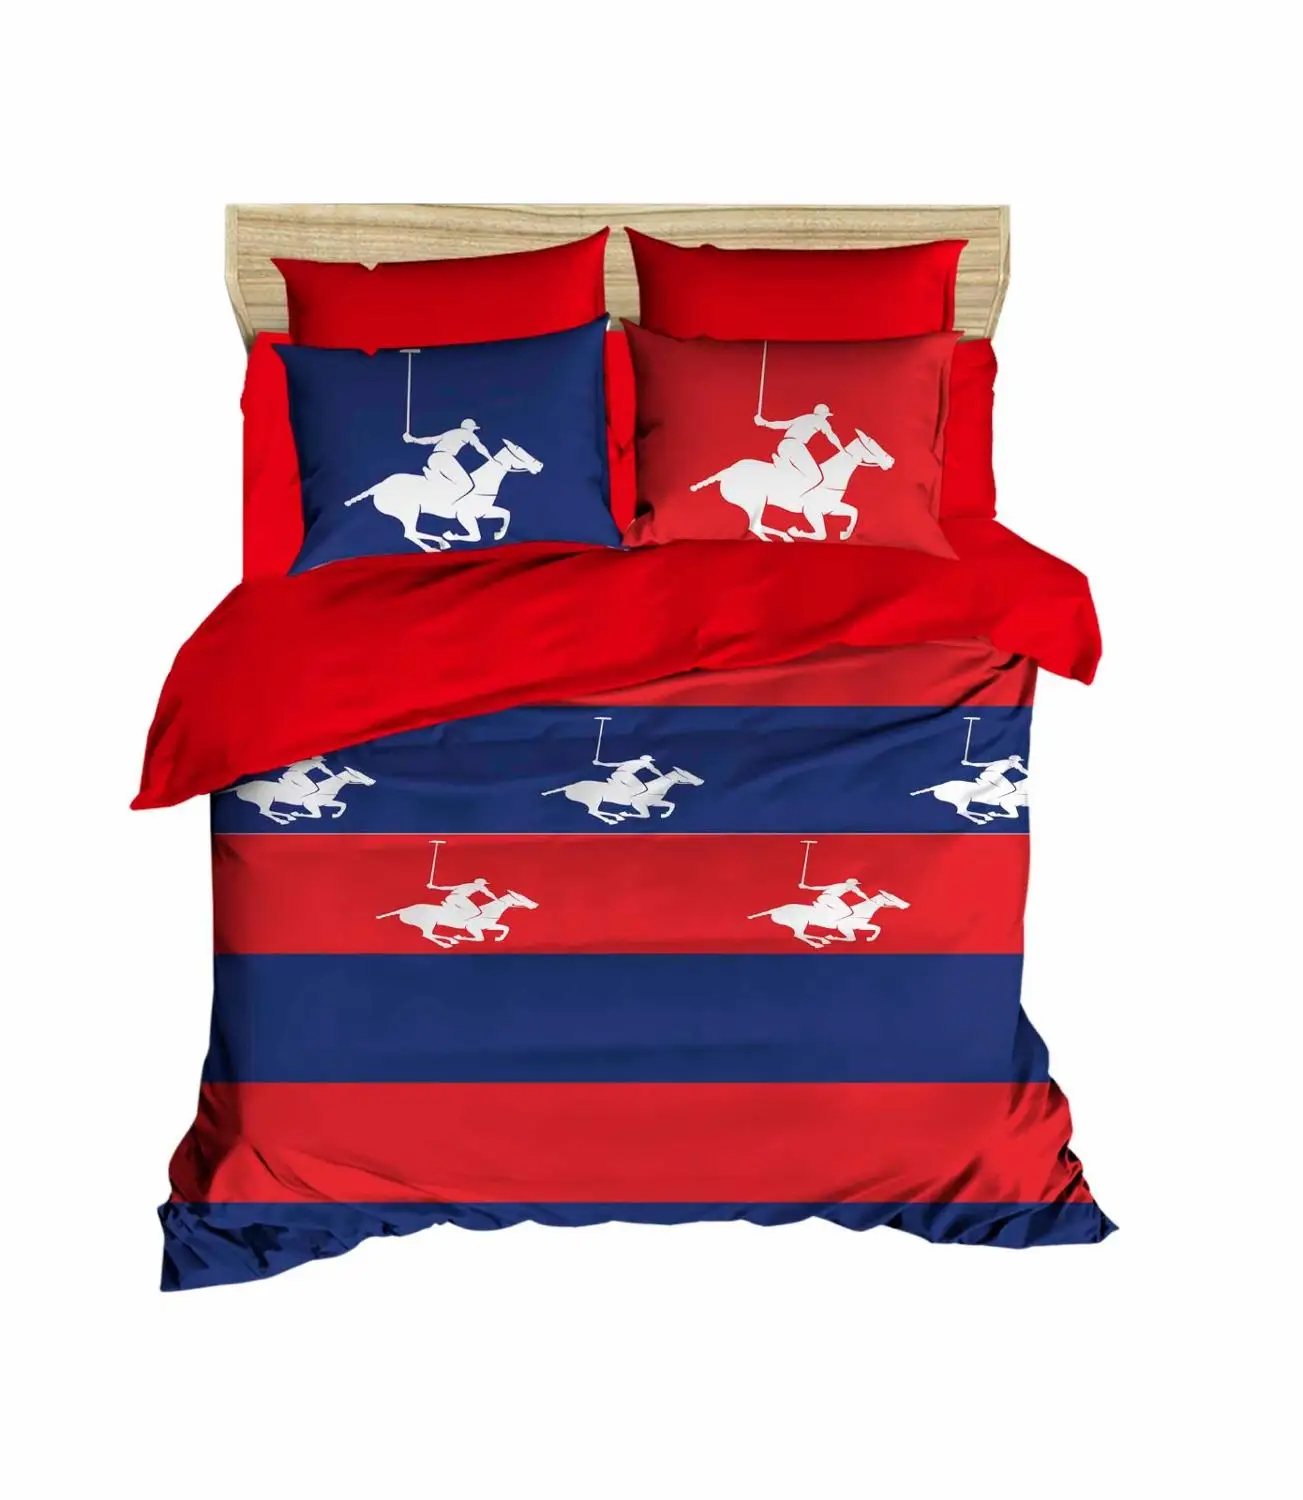 

100% Turkish Cotton Polo Horses Themed 3D Printed Duvet Cover Set, All Sizes, Made in Turkey